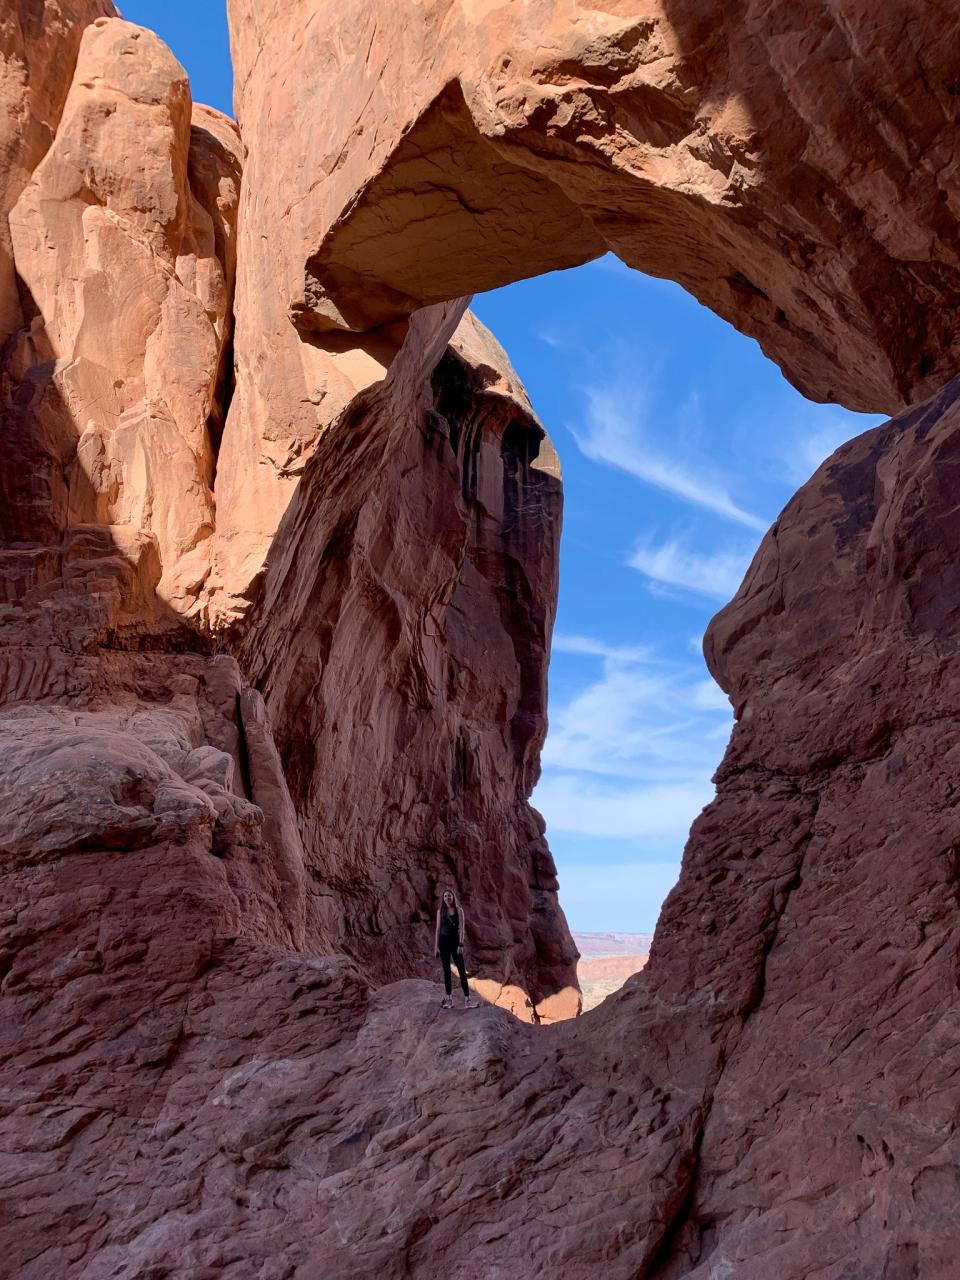 The author stands underneath an arch in Arches National Park.